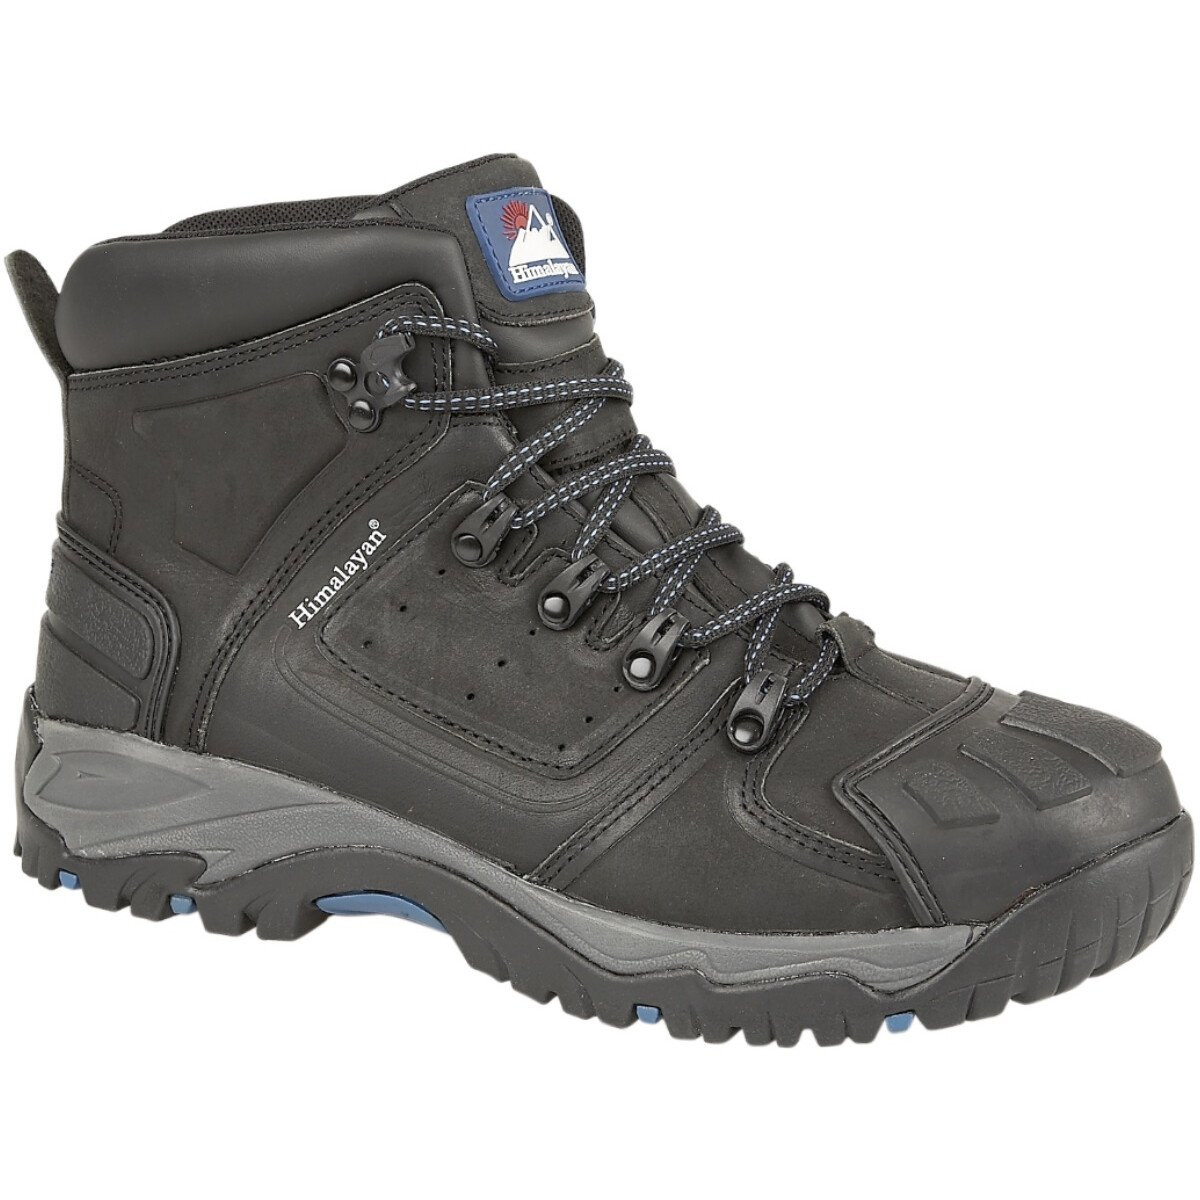 Simon Safety - Himalayan 5206 Waterproof Safety Boot - Size 10